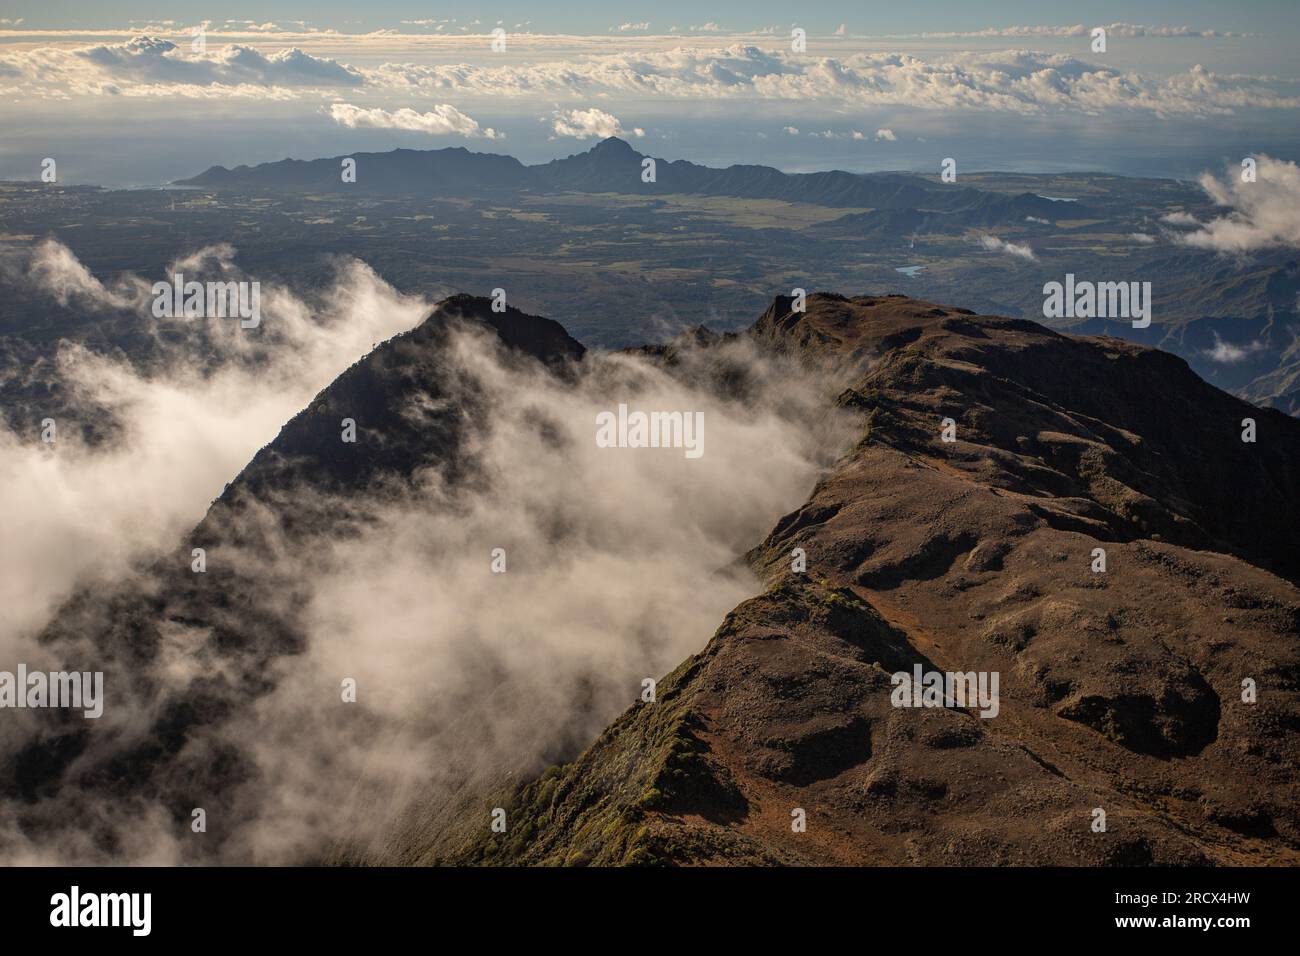 Clouds swirling around mountains of Kauai as seen from Helicopter Stock Photo